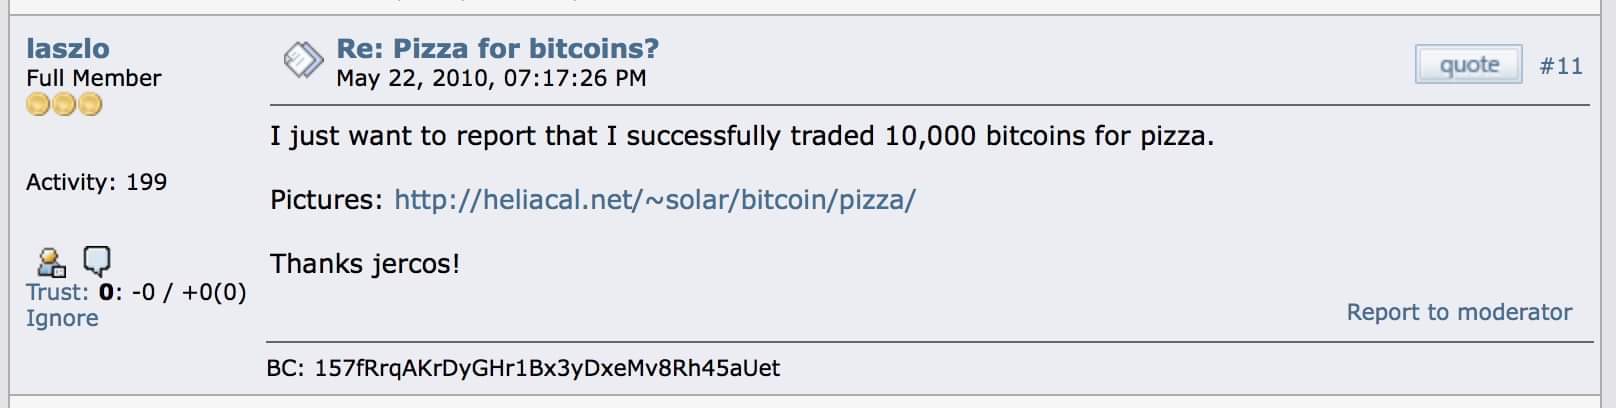 web page - laszlo Full Member O Re Pizza for bitcoins? , 26 Pm V quote I just want to report that I successfully traded 10,000 bitcoins for pizza. Activity 199 Pictures Thanks jercos! Trust 0 0 00 Ignore Report to moderator Bc 157fRrqAKrDYGHr1BX3yDxeMv8Rh